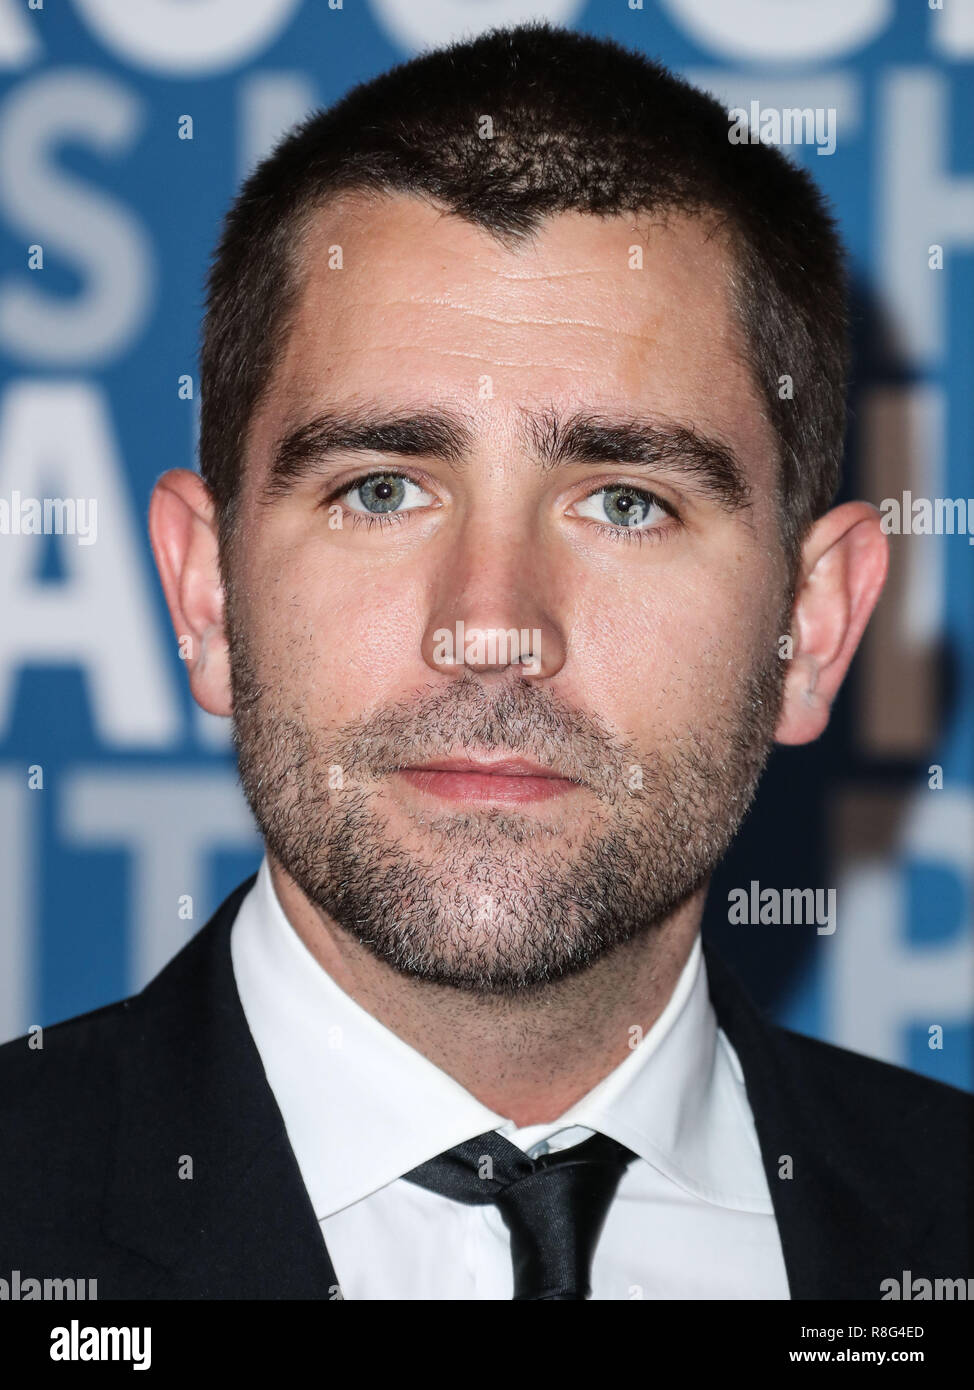 MOUNTAIN VIEW, CA, USA - DECEMBER 03: Chris Cox at the 2018 Breakthrough Prize Ceremony held at the NASA Ames Research Center on December 3, 2017 in Mountain View, California, United States. (Photo by Xavier Collin/Image Press Agency) Stock Photo